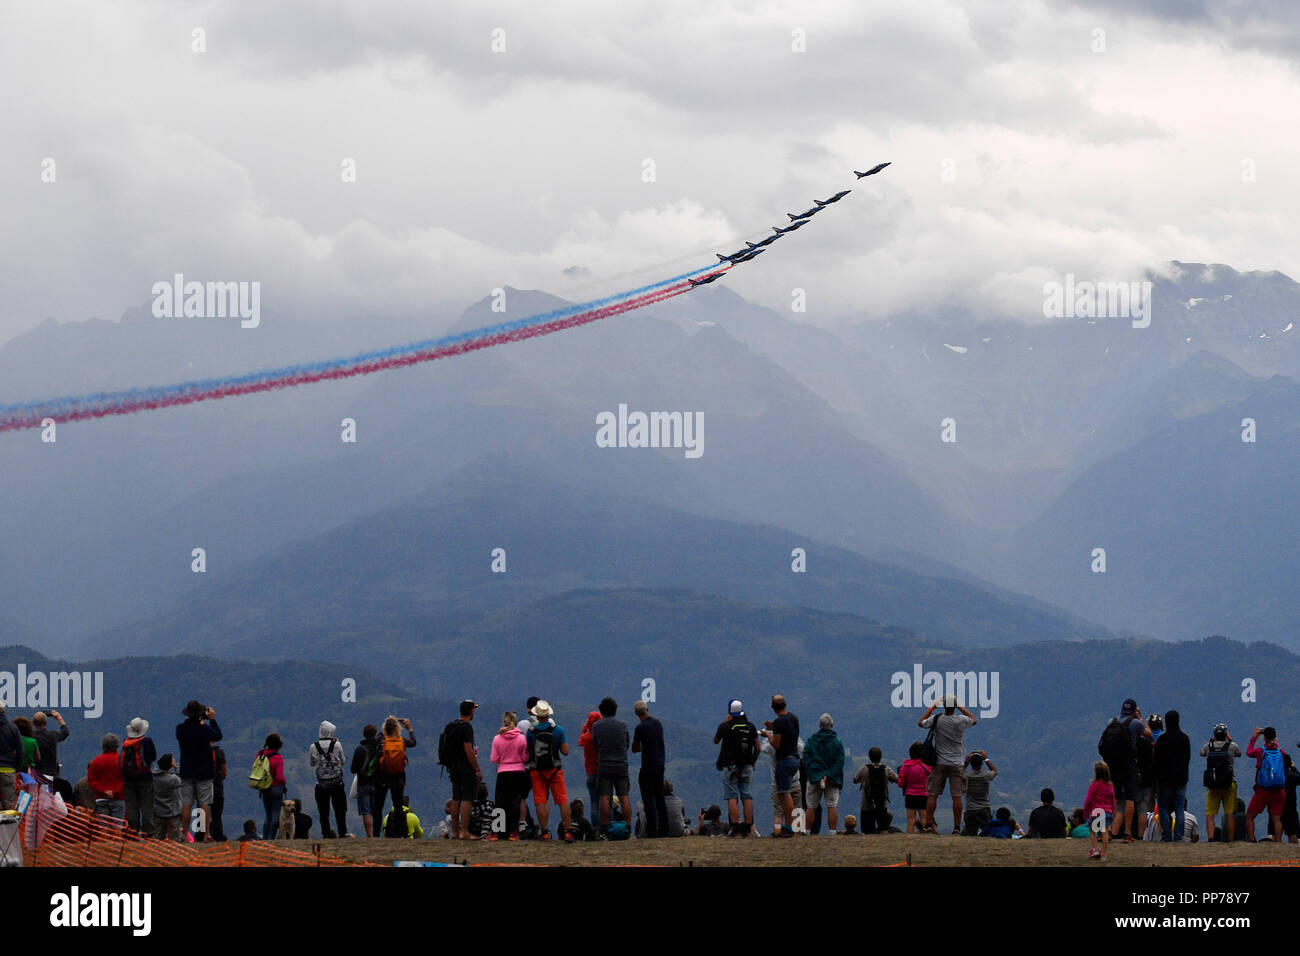 Saint Hilaire. 24th Sep, 2018. Spectators watch the show of 'Patrouille de France' in Saint-Hilaire, France on Sept. 21, 2018. The four-day air sports festival, Coupe Icare, concluded on Sunday. On its 45th edition, the Coupe Icare this year attracted about 700 accredited pilots and over 90,000 spectators. Credit: Chen Yichen/Xinhua/Alamy Live News Stock Photo